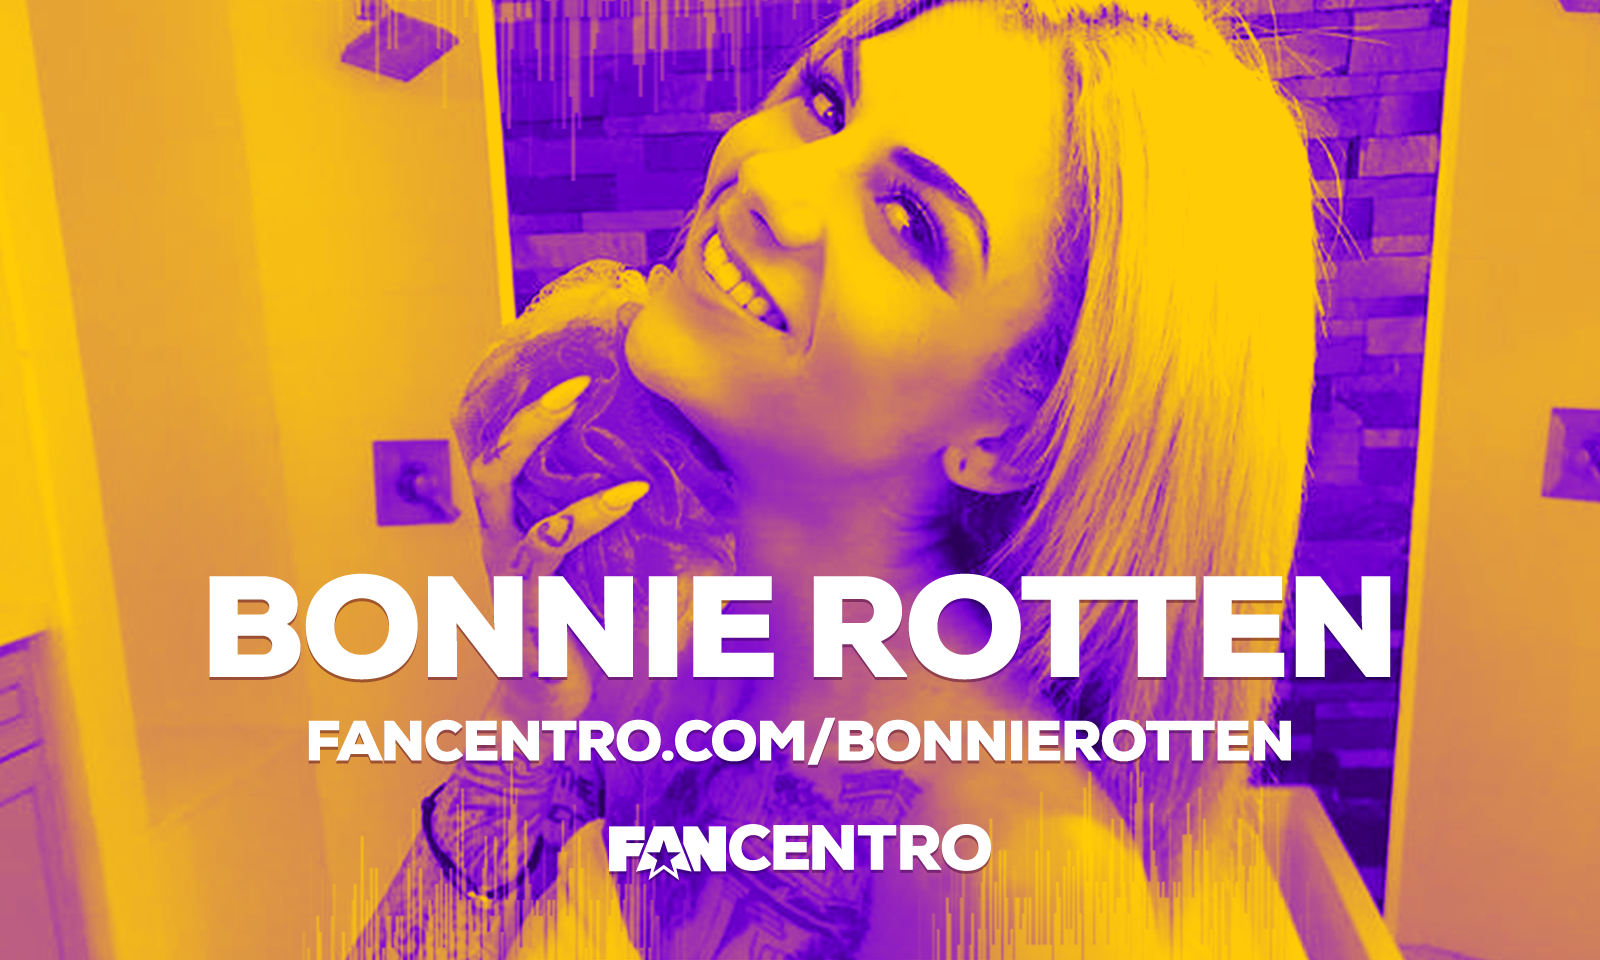 AVN Performer of the Year Bonnie Rotten Joins Fancentro